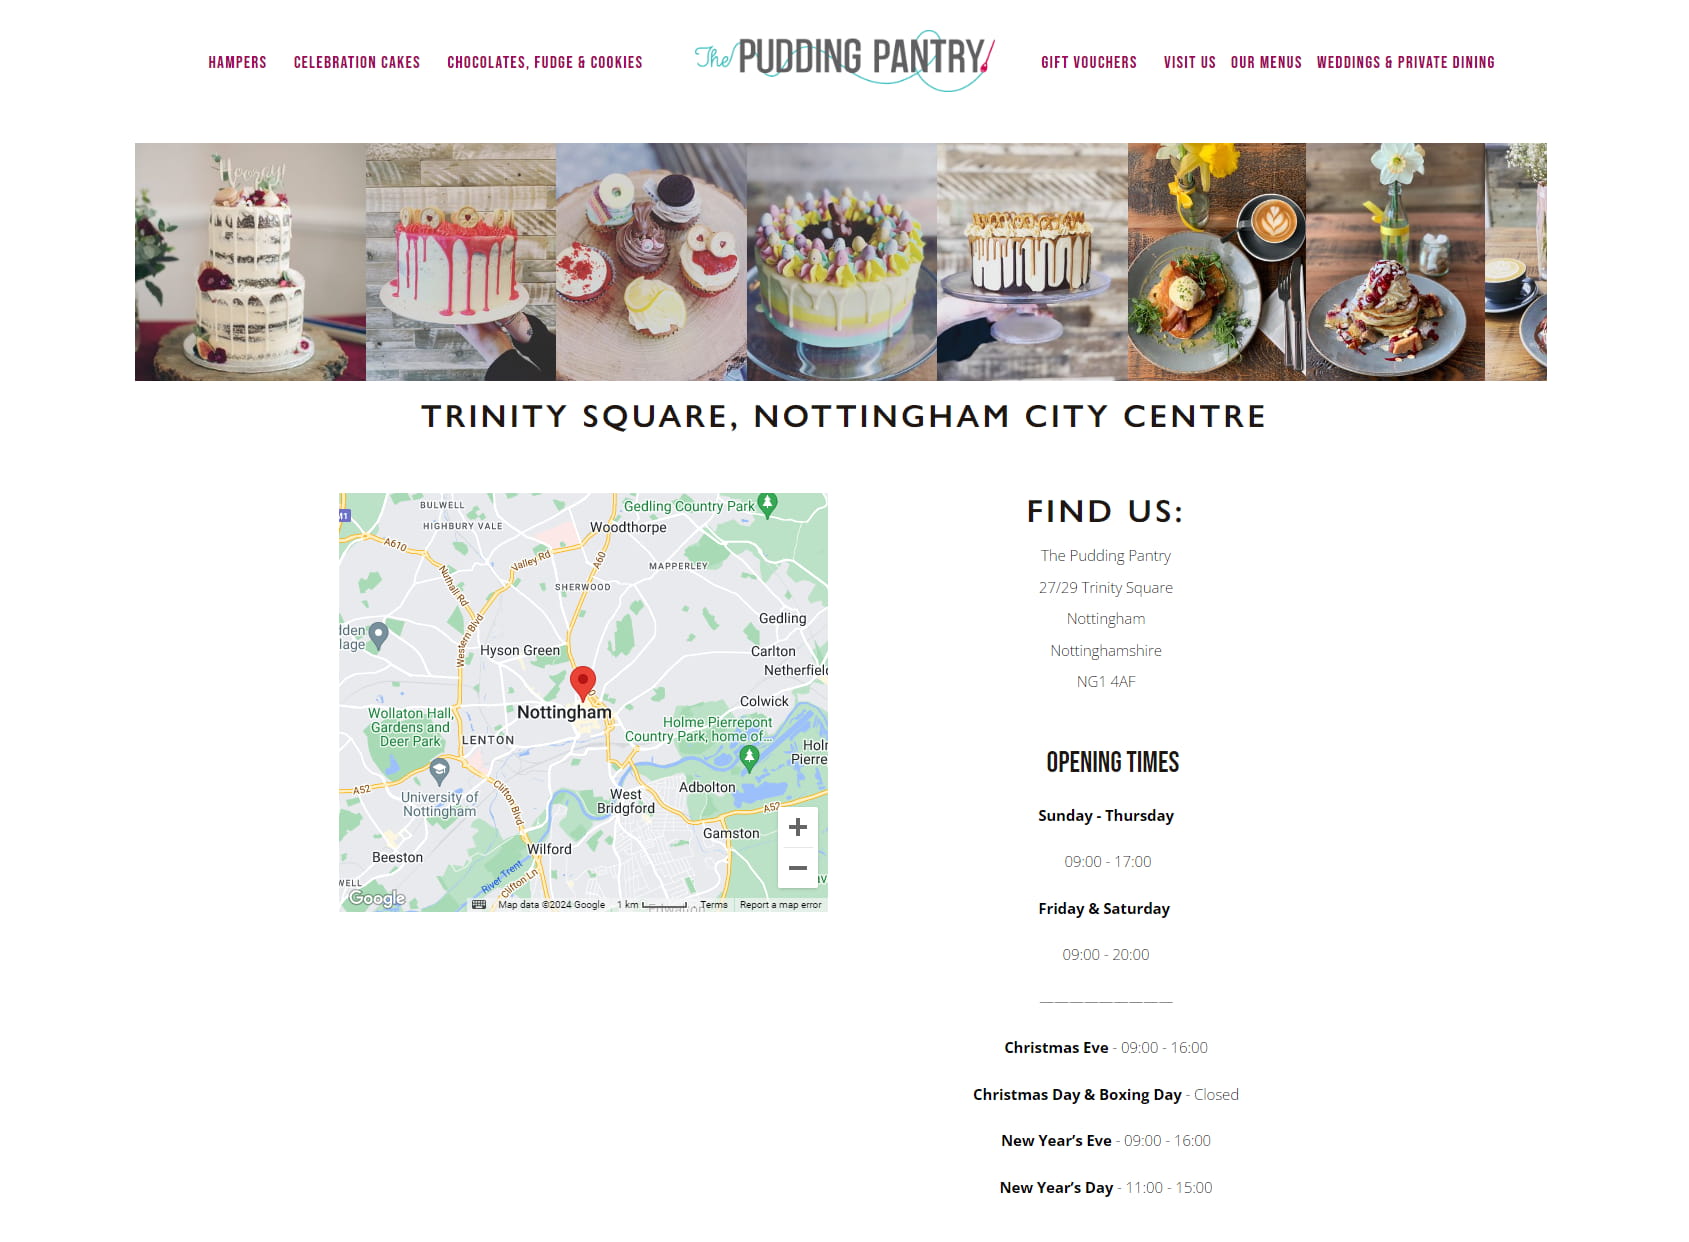 The Pudding Pantry Nottingham